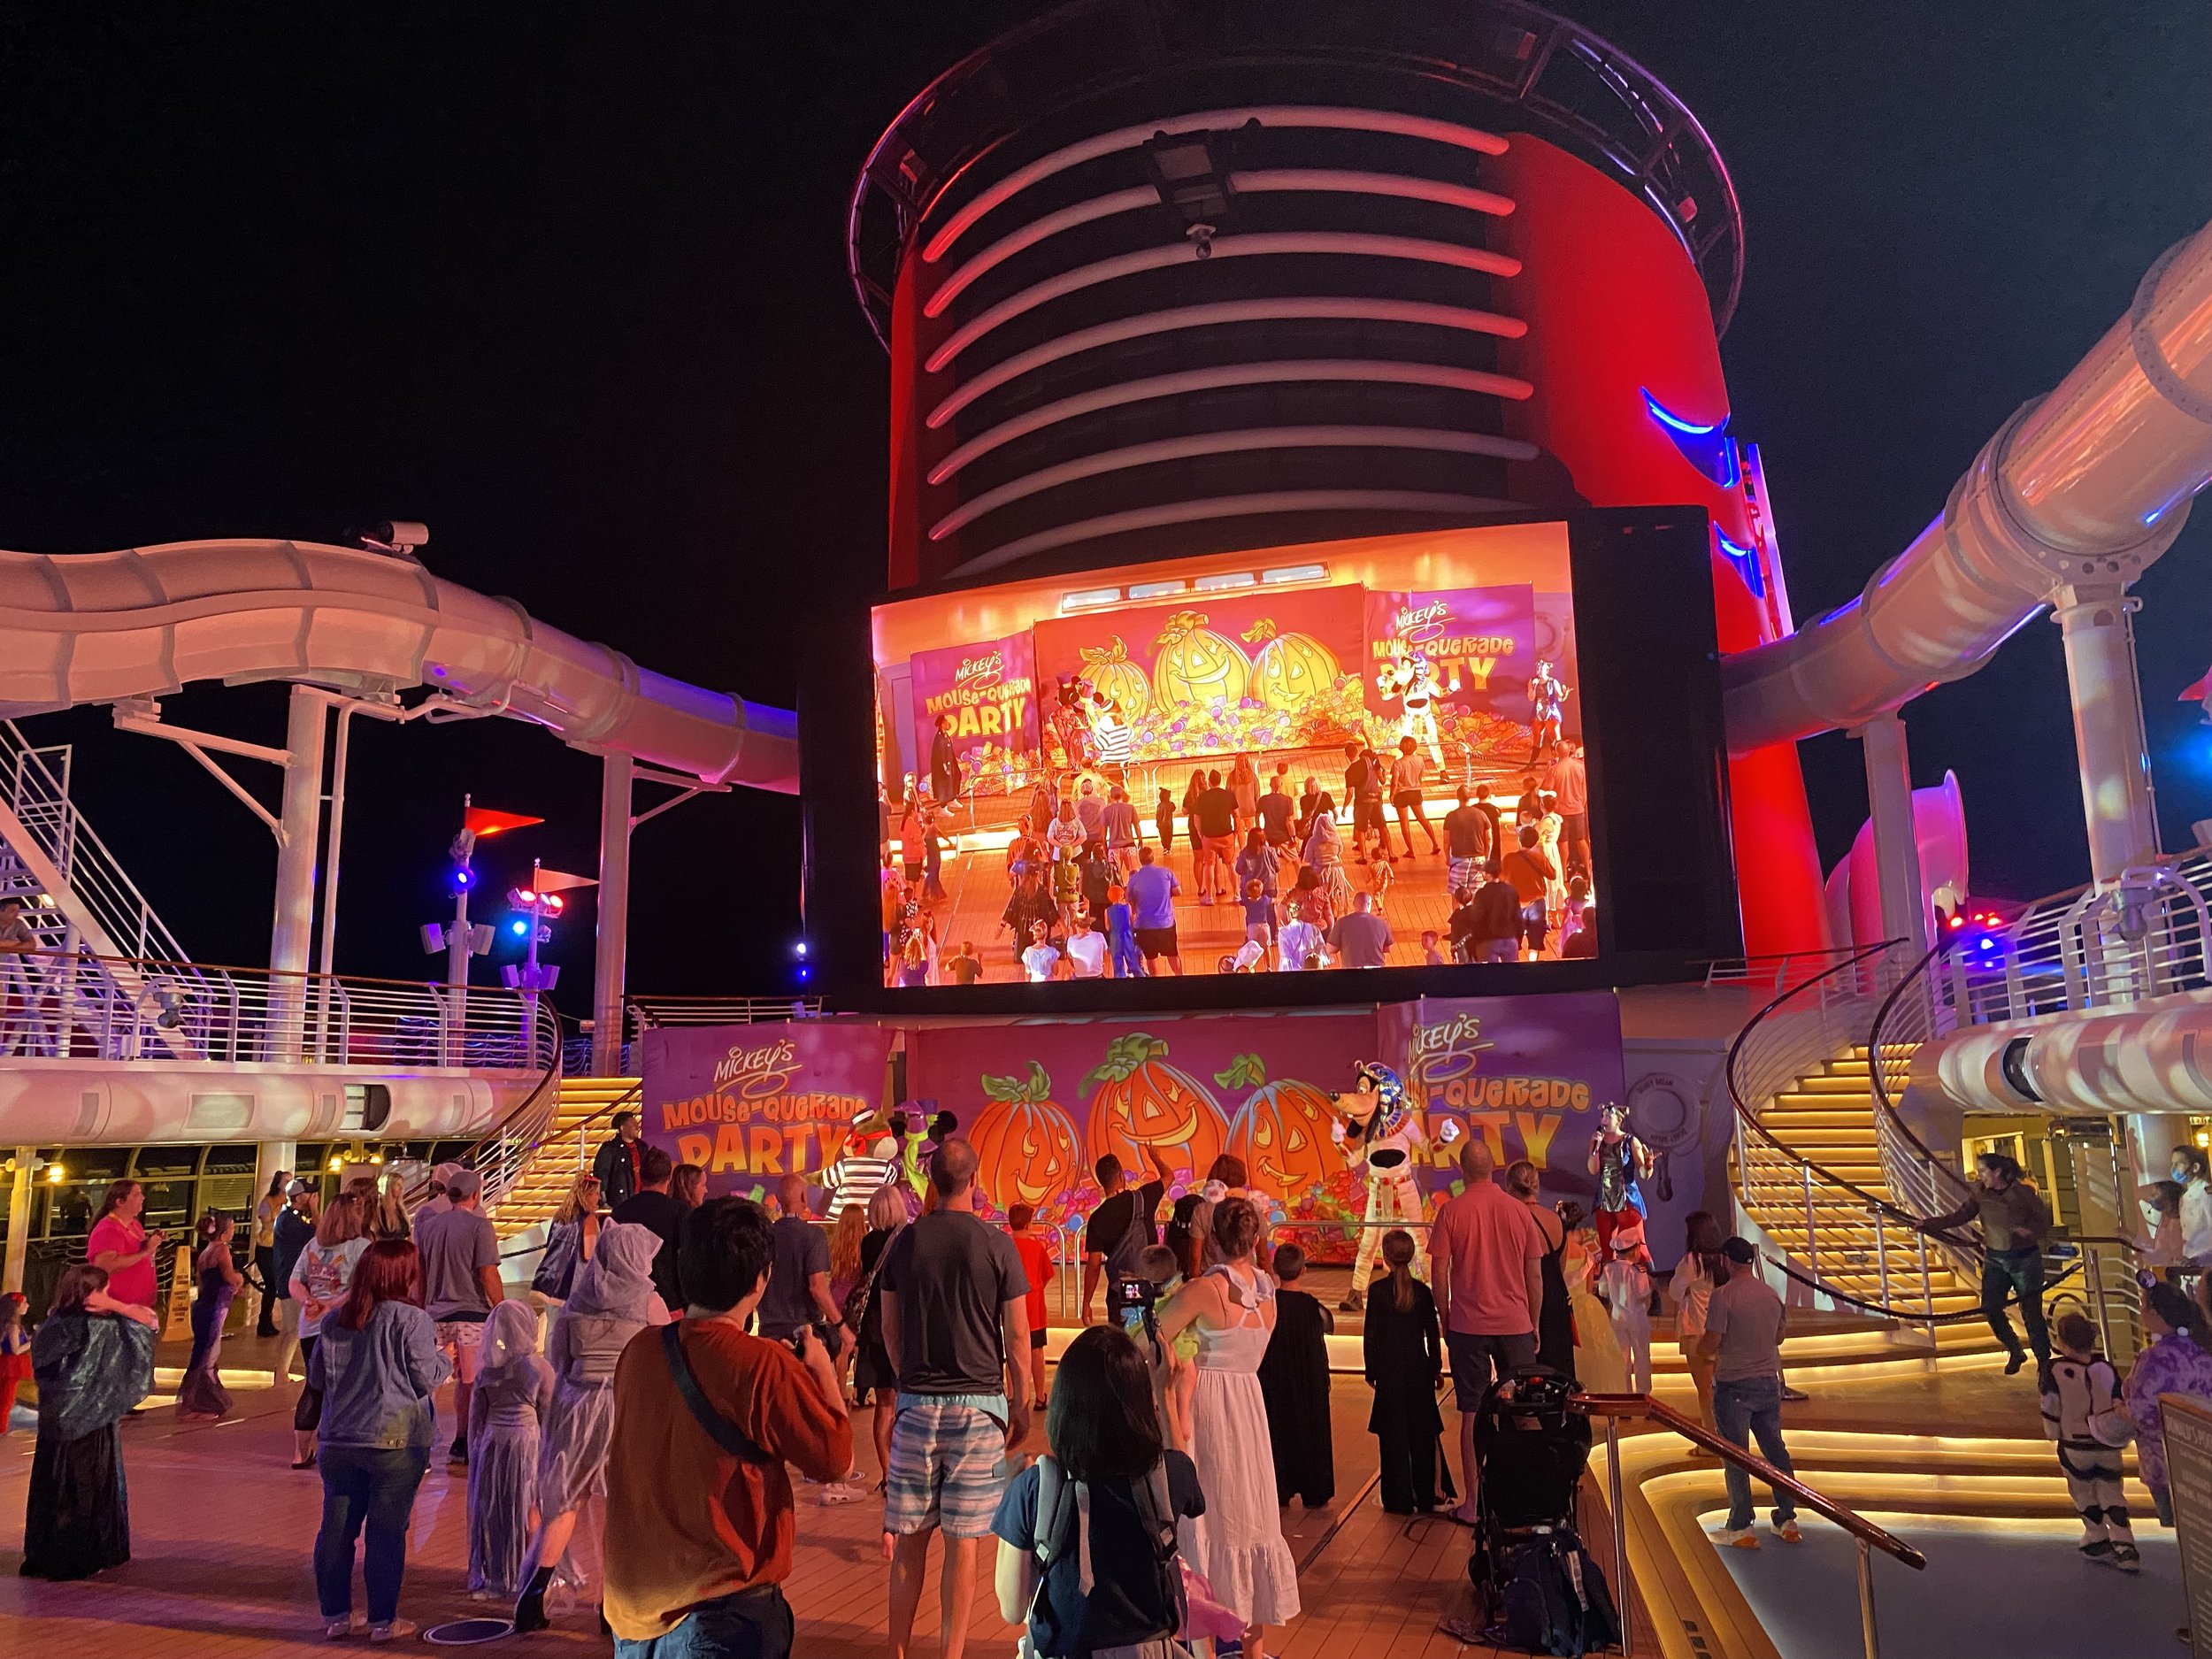  The family-friendly parties at night are not to be missed. This was Halloween on the High Seas party, led my Mickey and pals. Guests of all ages were encouraged to come in costume.  